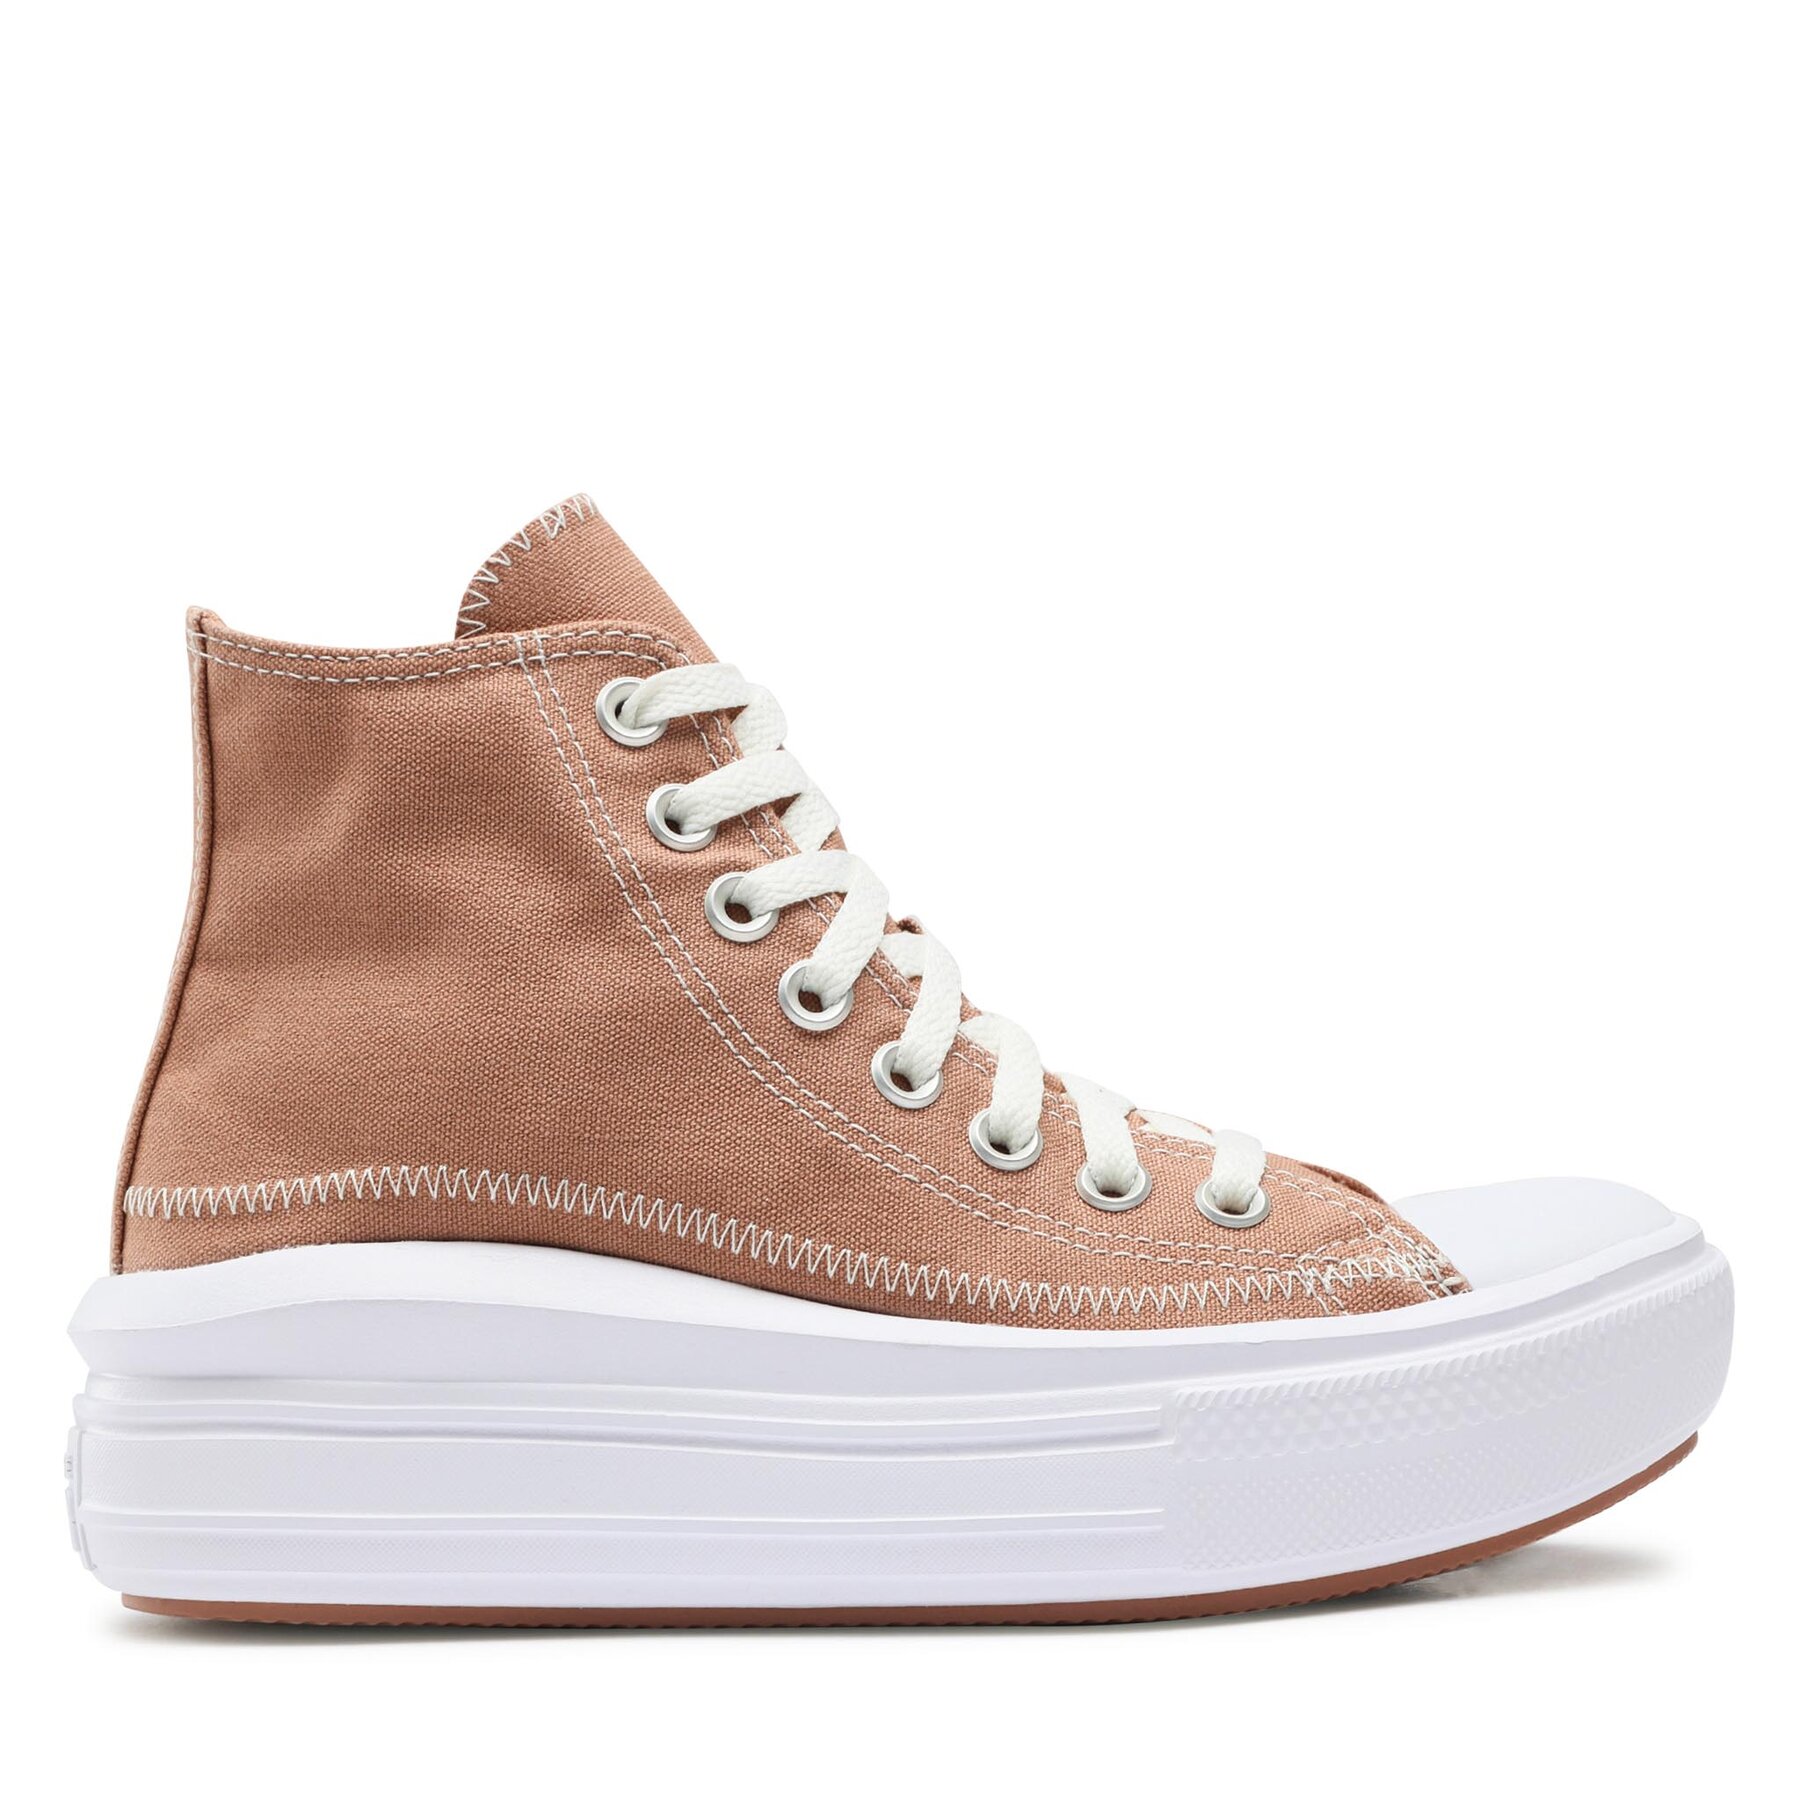 Sneakers aus Stoff Converse Chuck Taylor All Star Move A04672C Taupe/Red von Converse